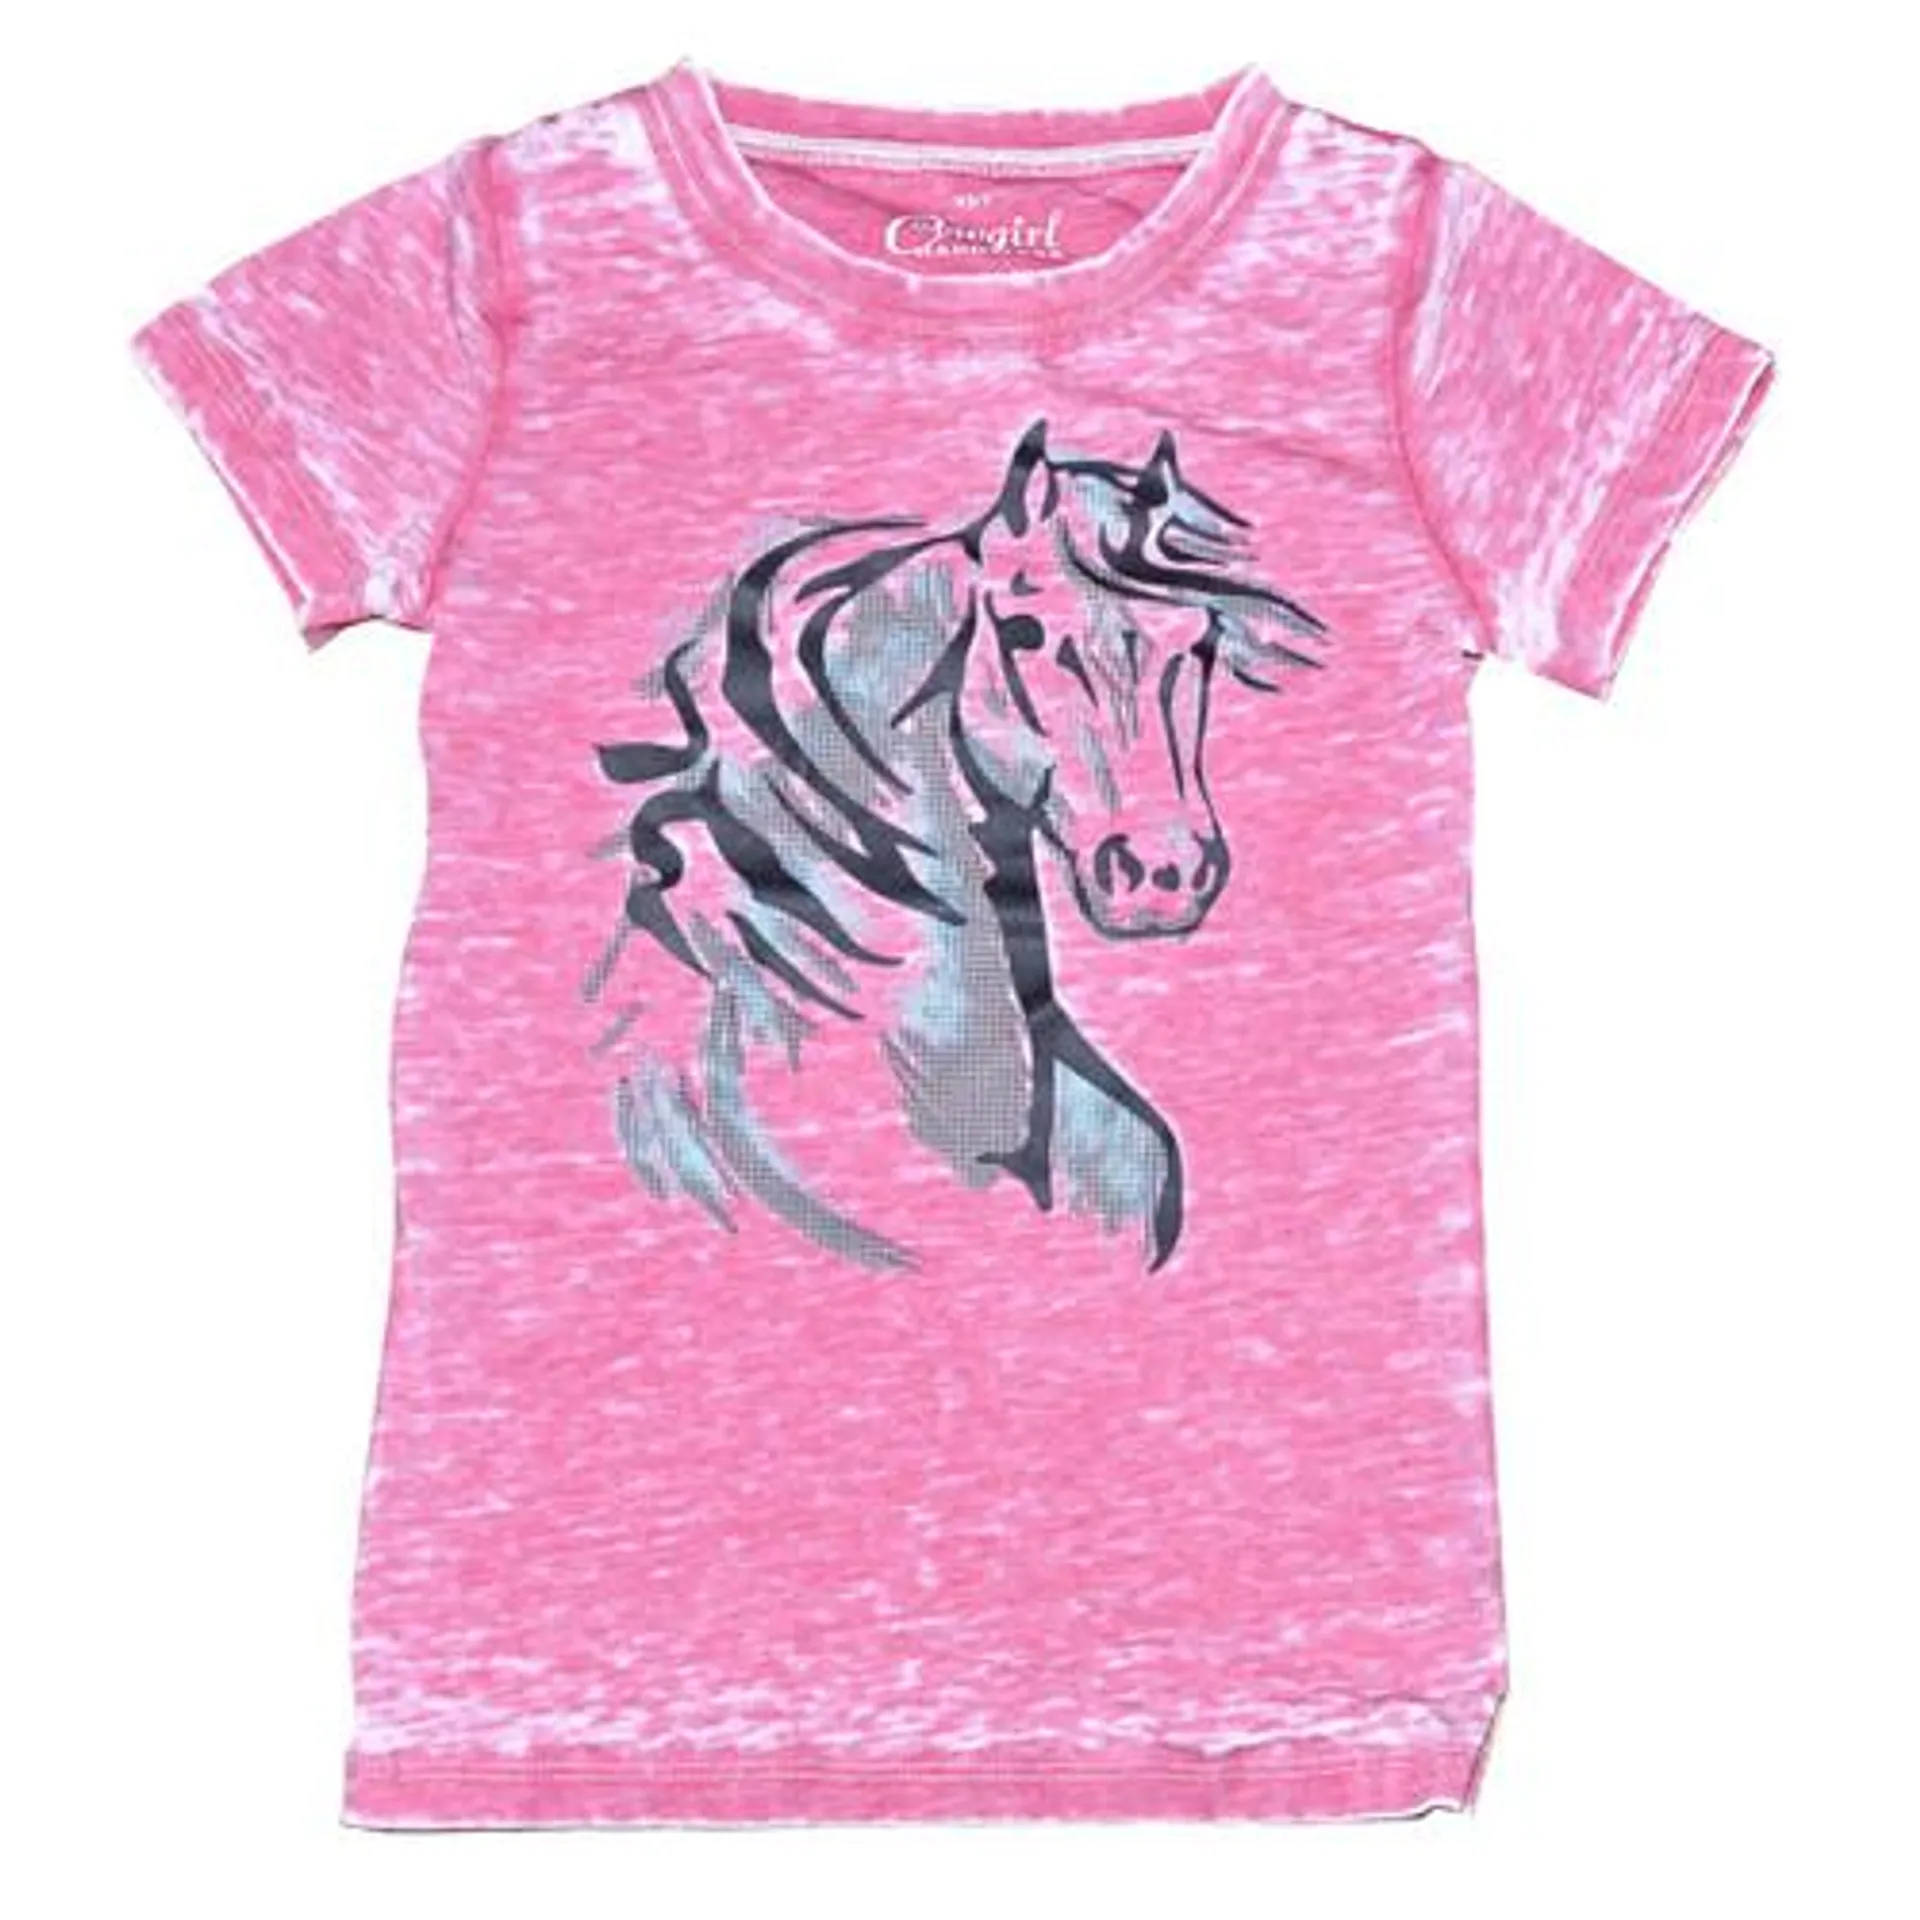 Cowgirl Hardware Girls Pink Short Sleeve Shirt with a Gray Watercolor Horse Graphic